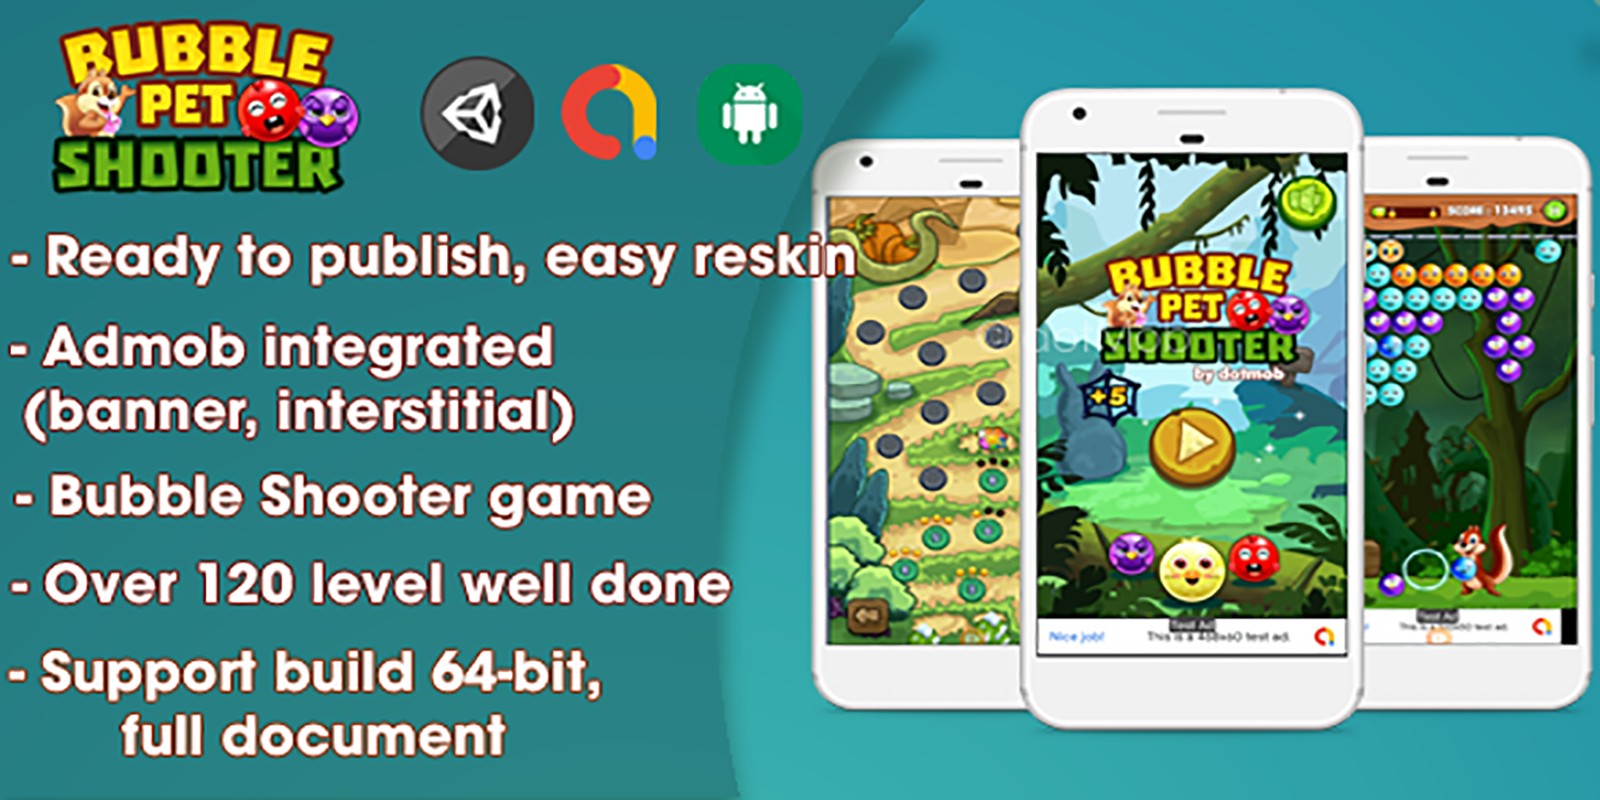 Bubble Shooter Pet - Unity Complete Project (Android + iOS + AdMob)